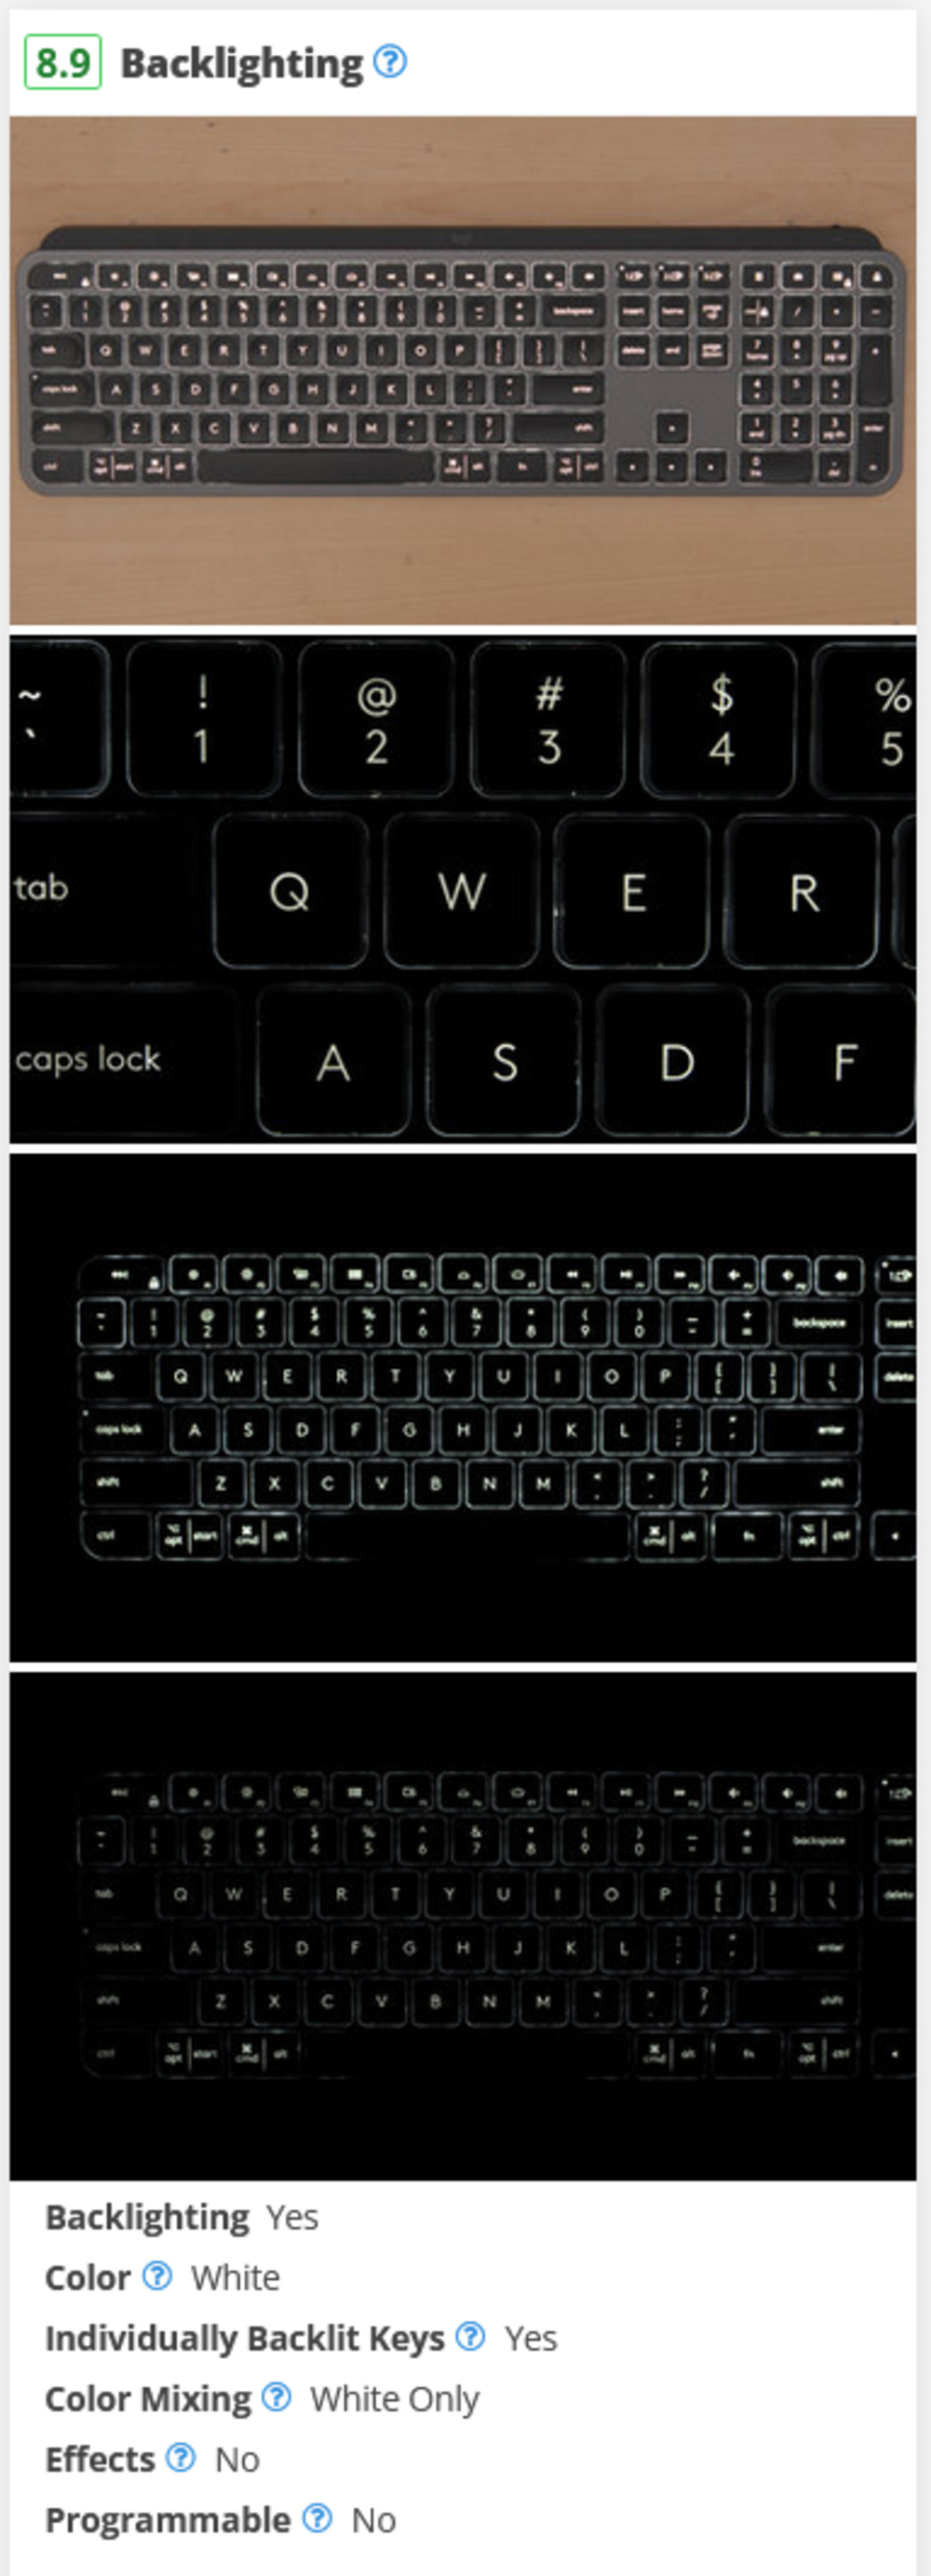 An example of our old Backlighting results for the Logitech MX Keys